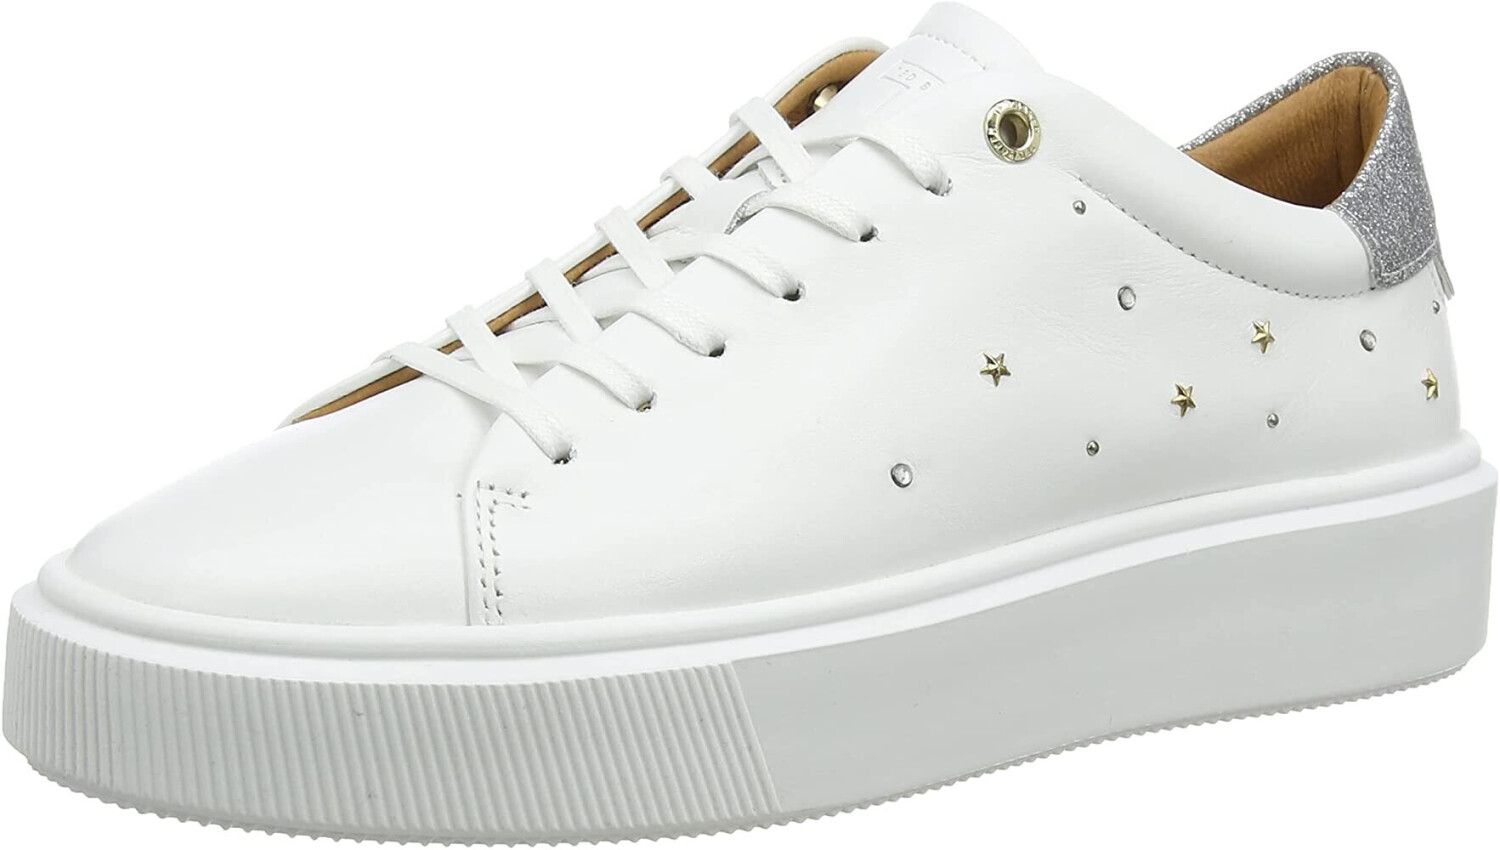 Buy Ted Baker Starriy Trainers from £38.00 (Today) – Best Deals on ...